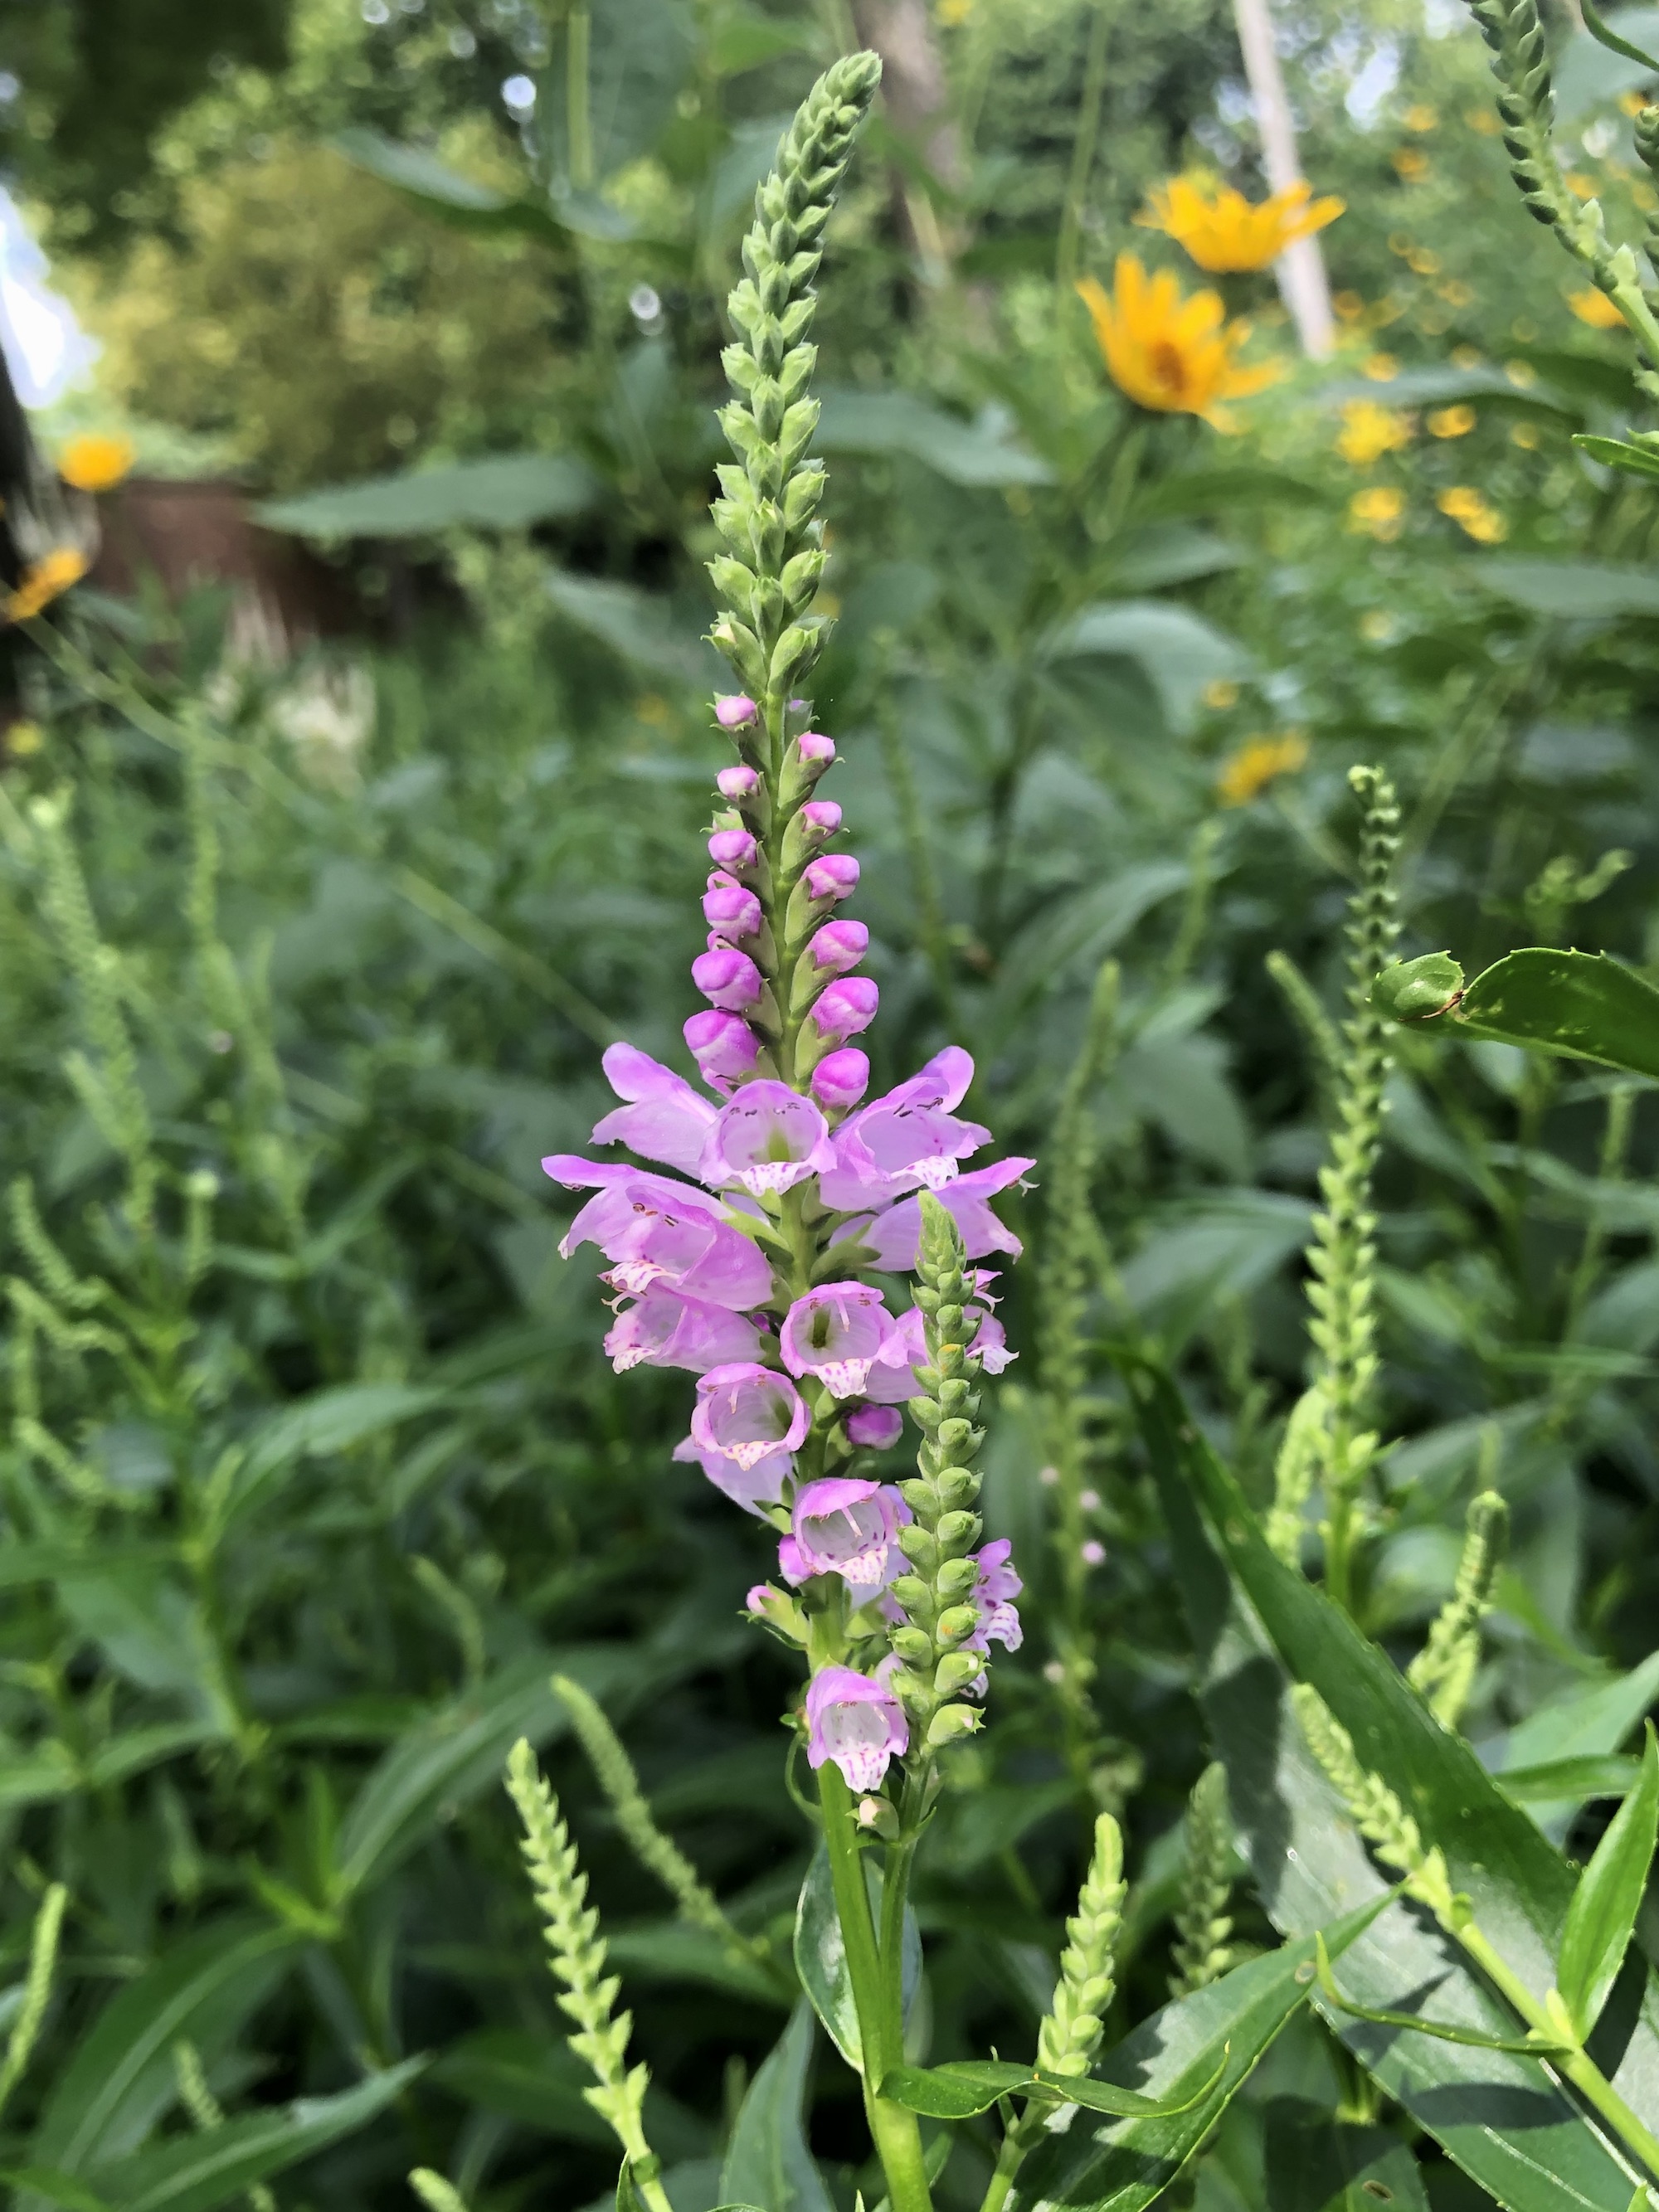 Obedient Plant in Thoreau Rain Garden in Madison, Wisconsin on July 25, 2020.